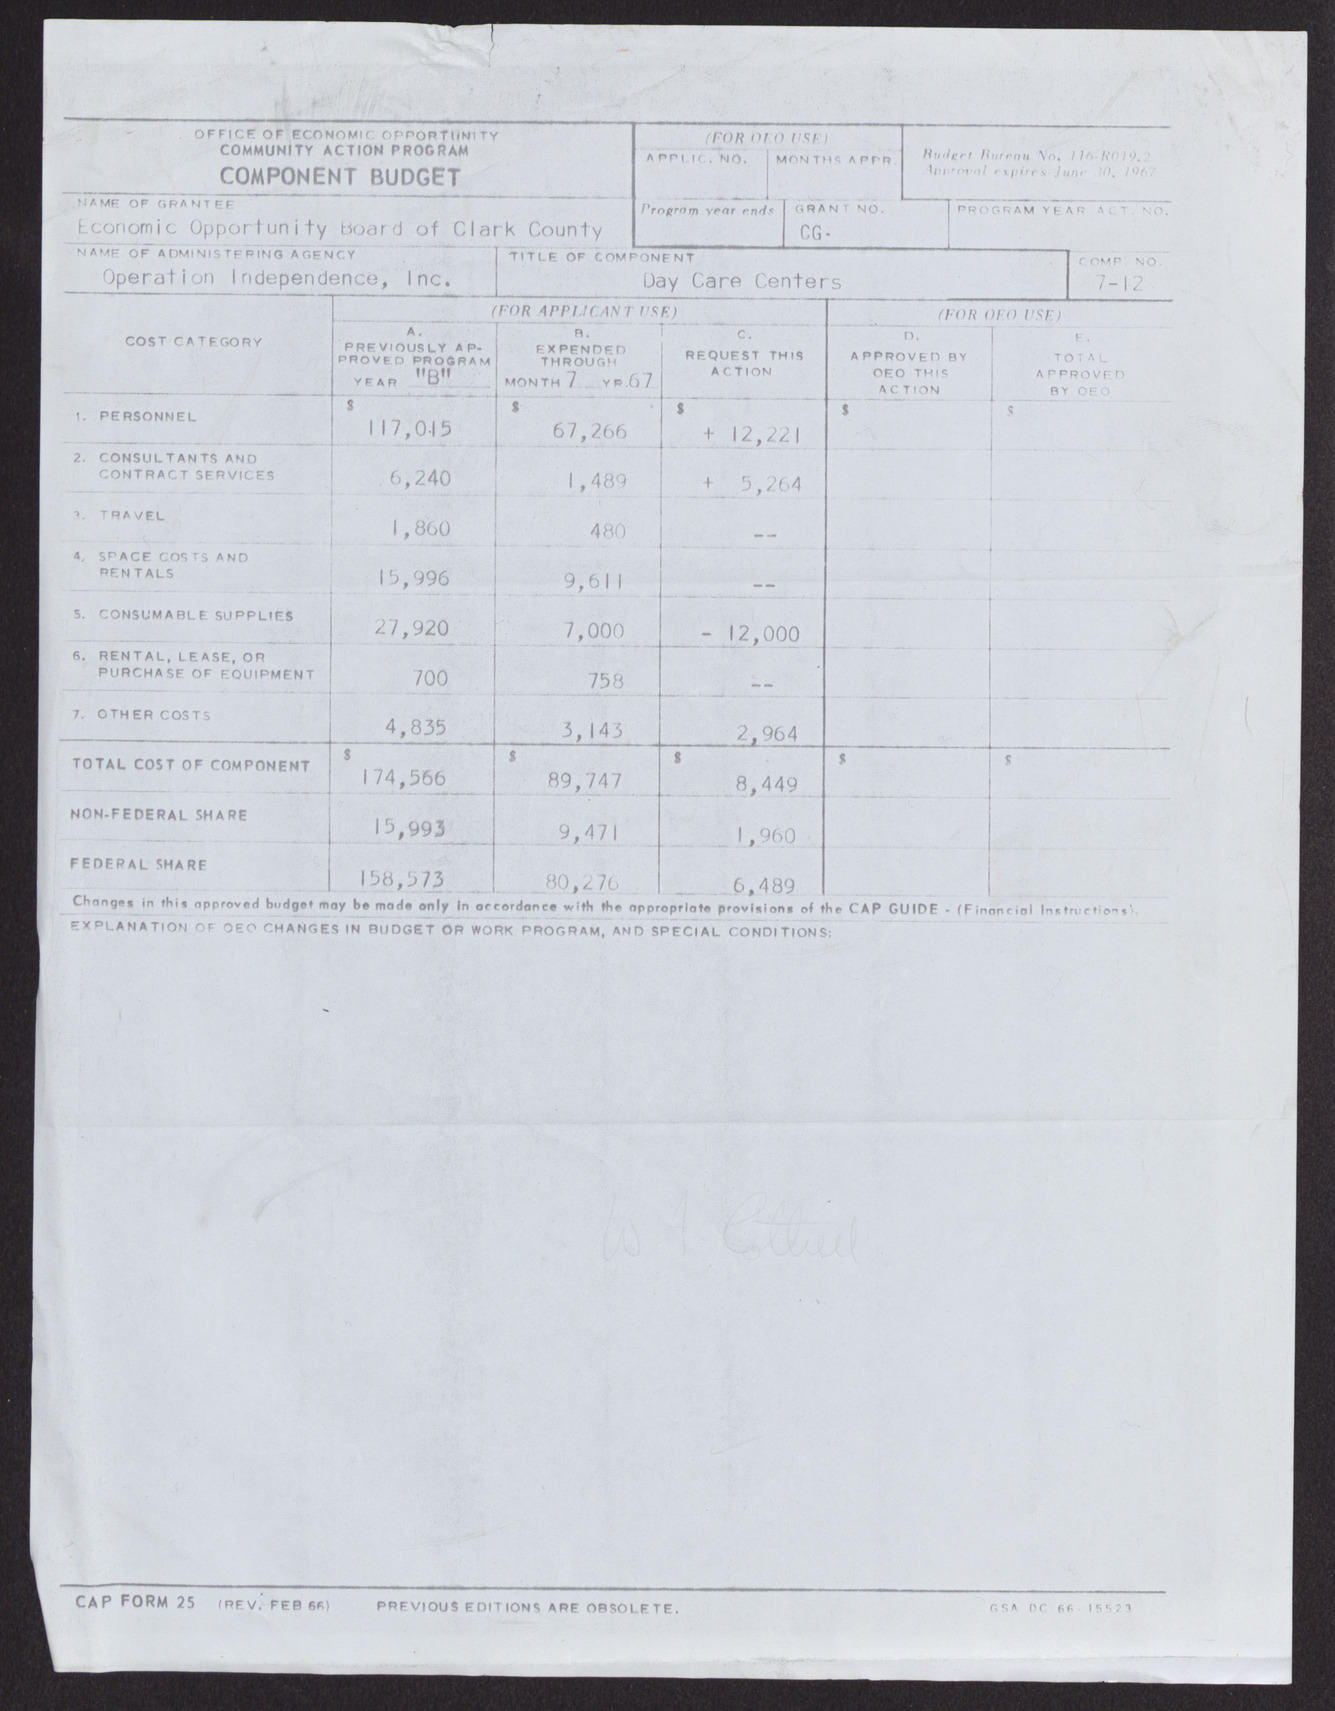 Budget approval form, no date